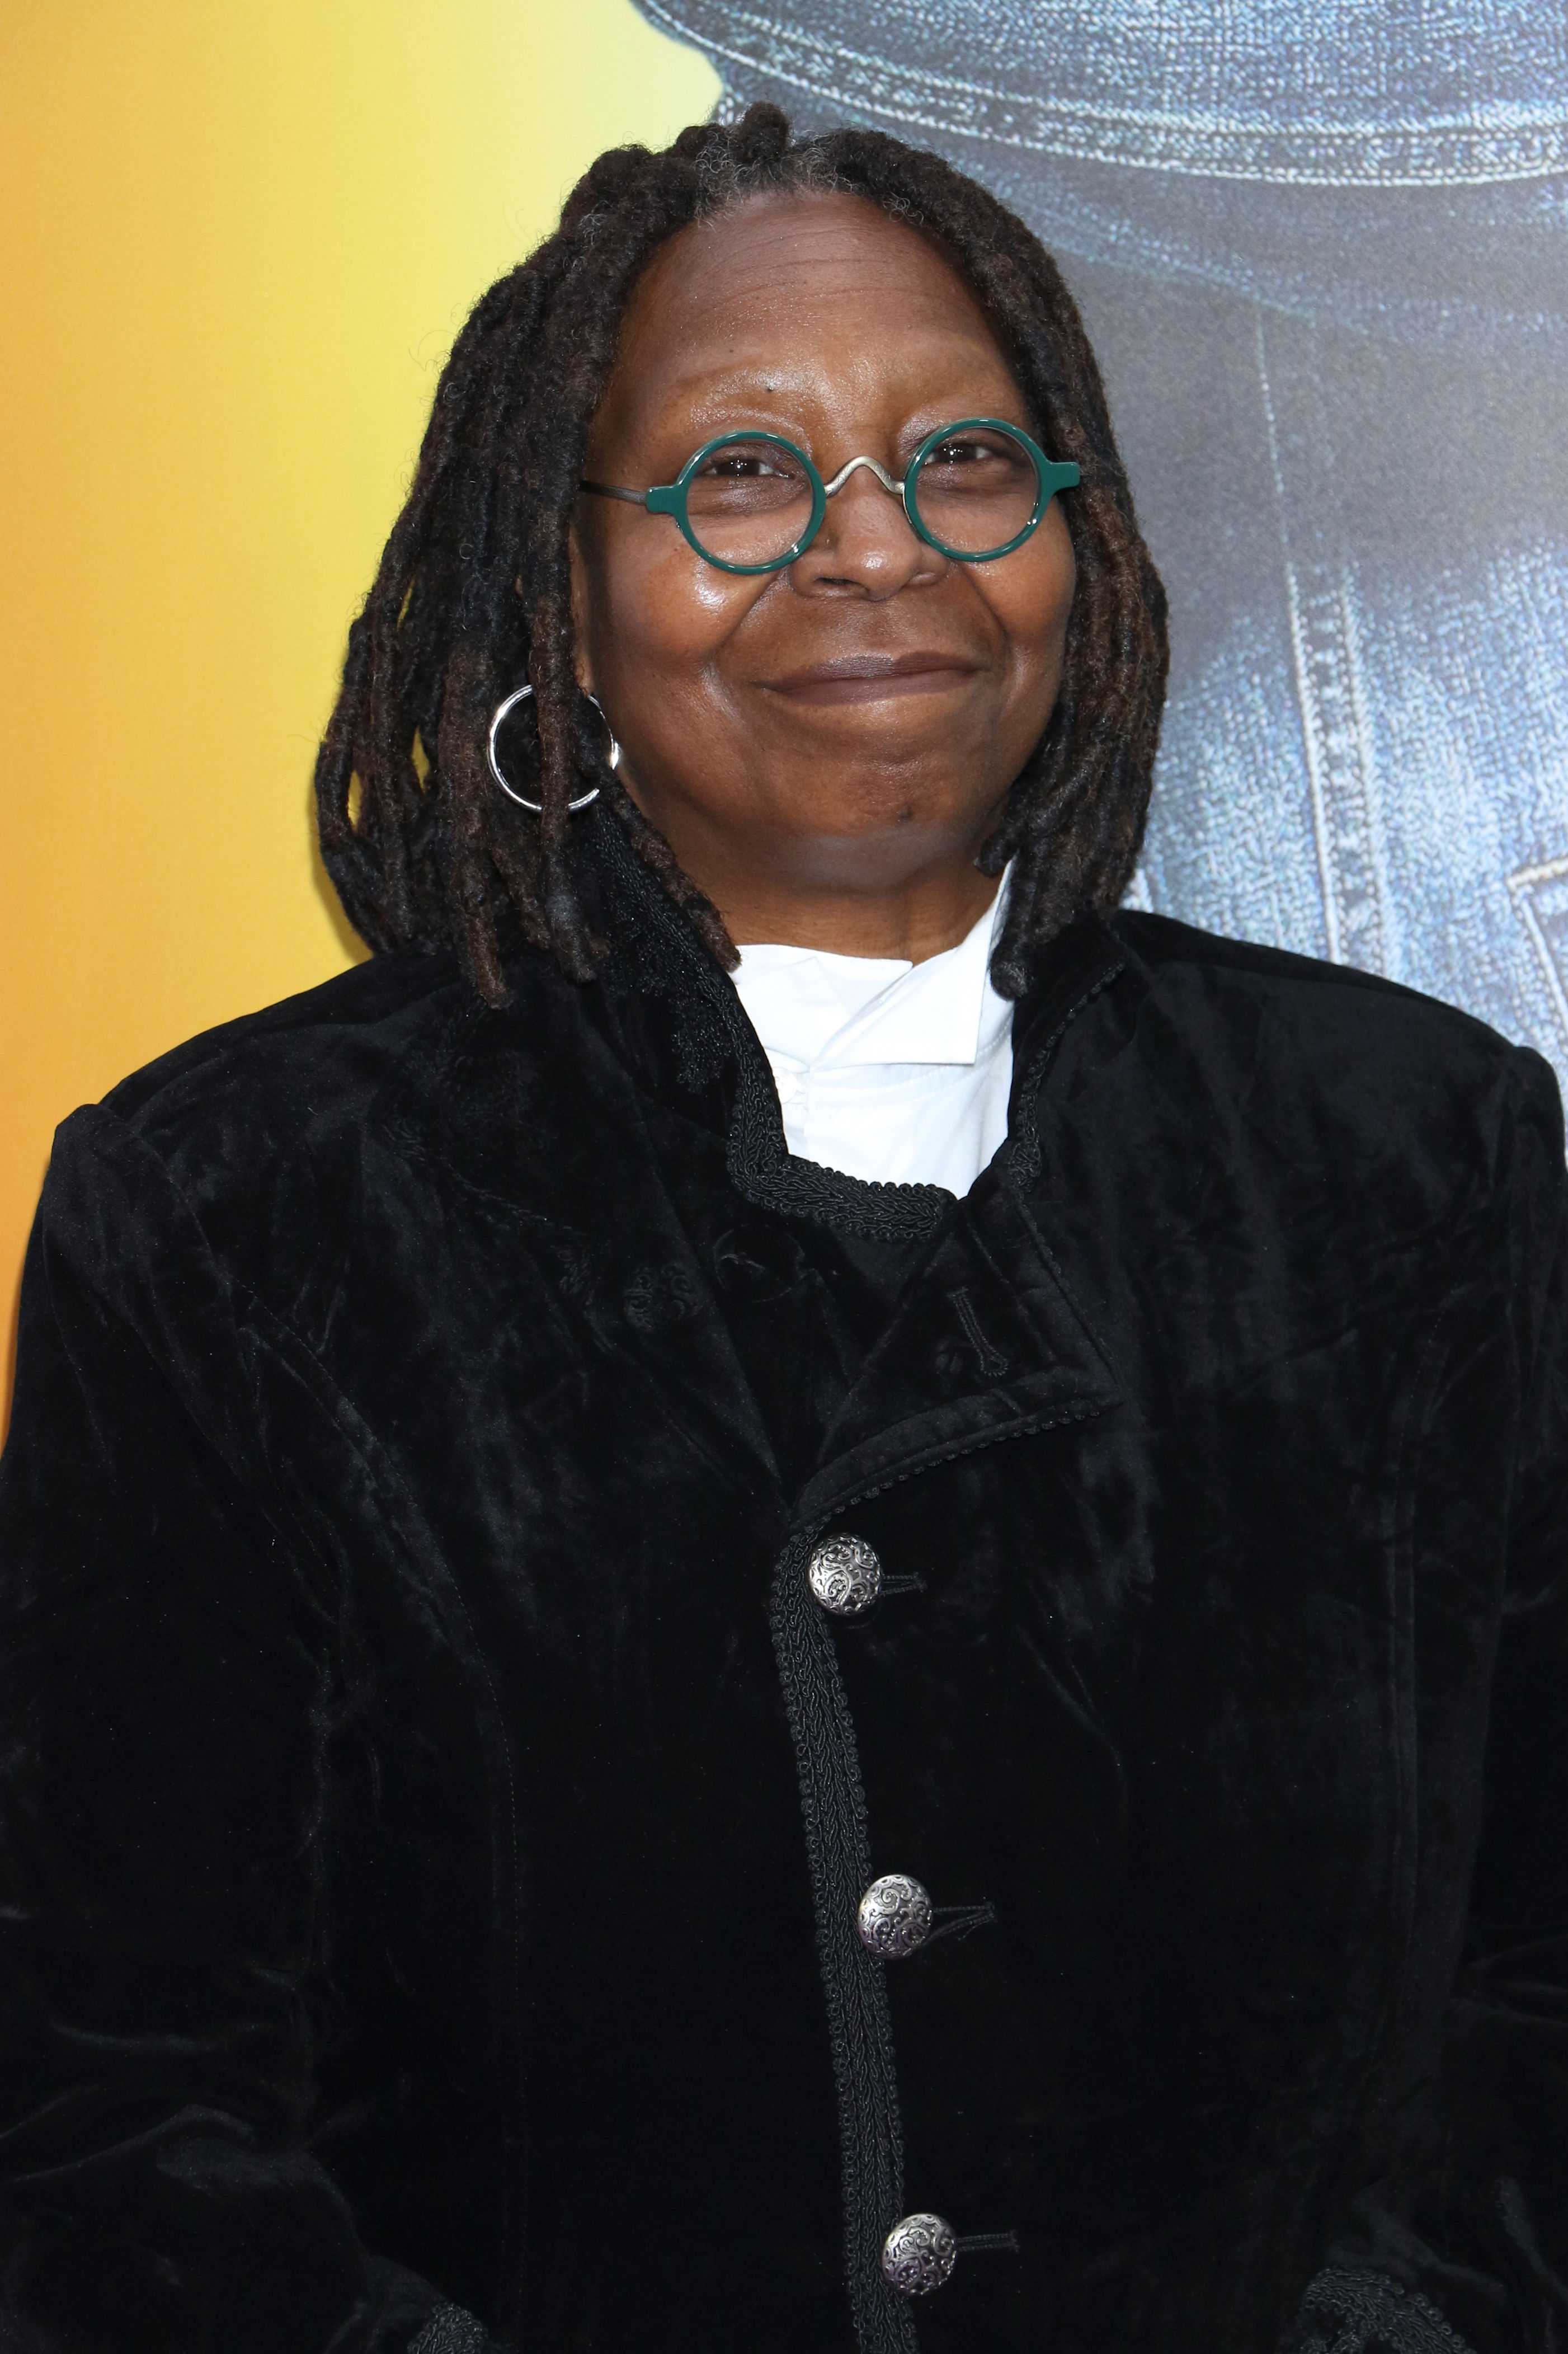 <p>Whoopi Goldberg proved just how talented she is when she became the very first Black EGOT winner in 2002. The "The View" host won a Grammy in 1986 for her comedy record "Whoopi Goldberg: Original Broadway Show," an Oscar in 1990 for her work in "Ghost," a Tony in 2002 for producing "Thoroughly Modern Millie," and an Emmy in 2002 for her performance in "Beyond Tara: The Extraordinary Life of Hattie McDaniel."</p>